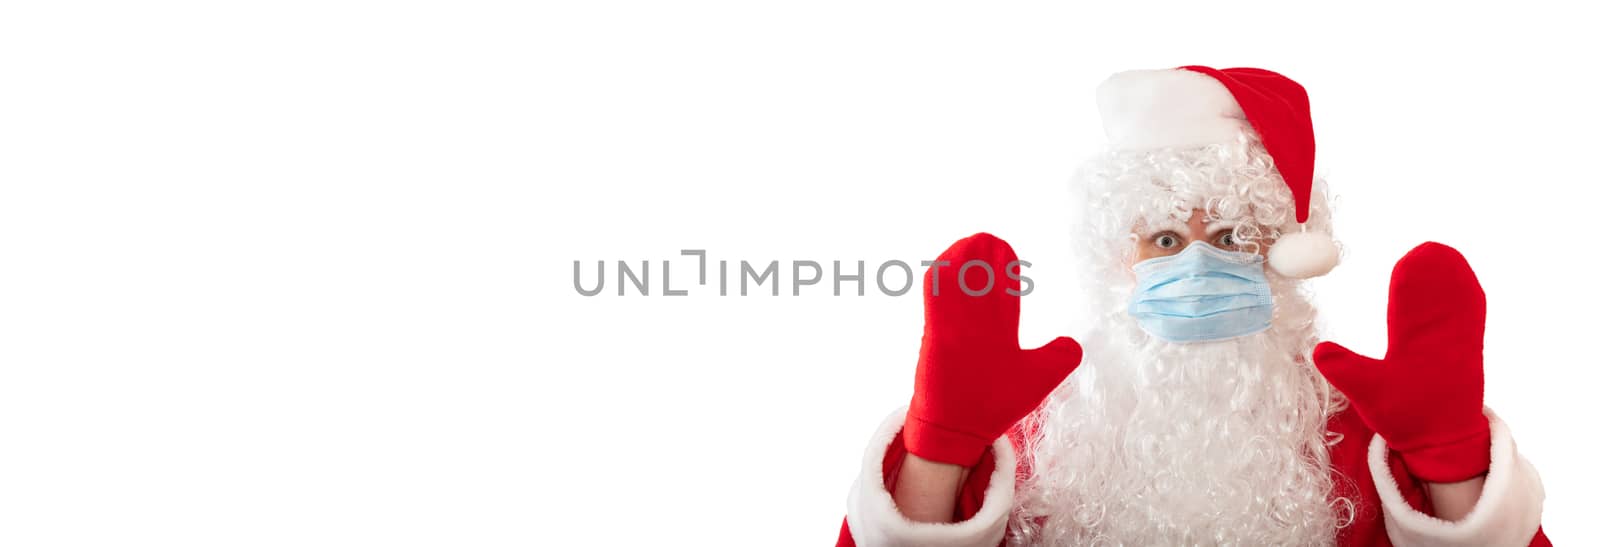 View of a man wearing Santa Claus costume, medical mask, having his both hands up, eyes wide open in warning gesture, isolated on white background. Banner size, copy space. Pandemic holiday concept.